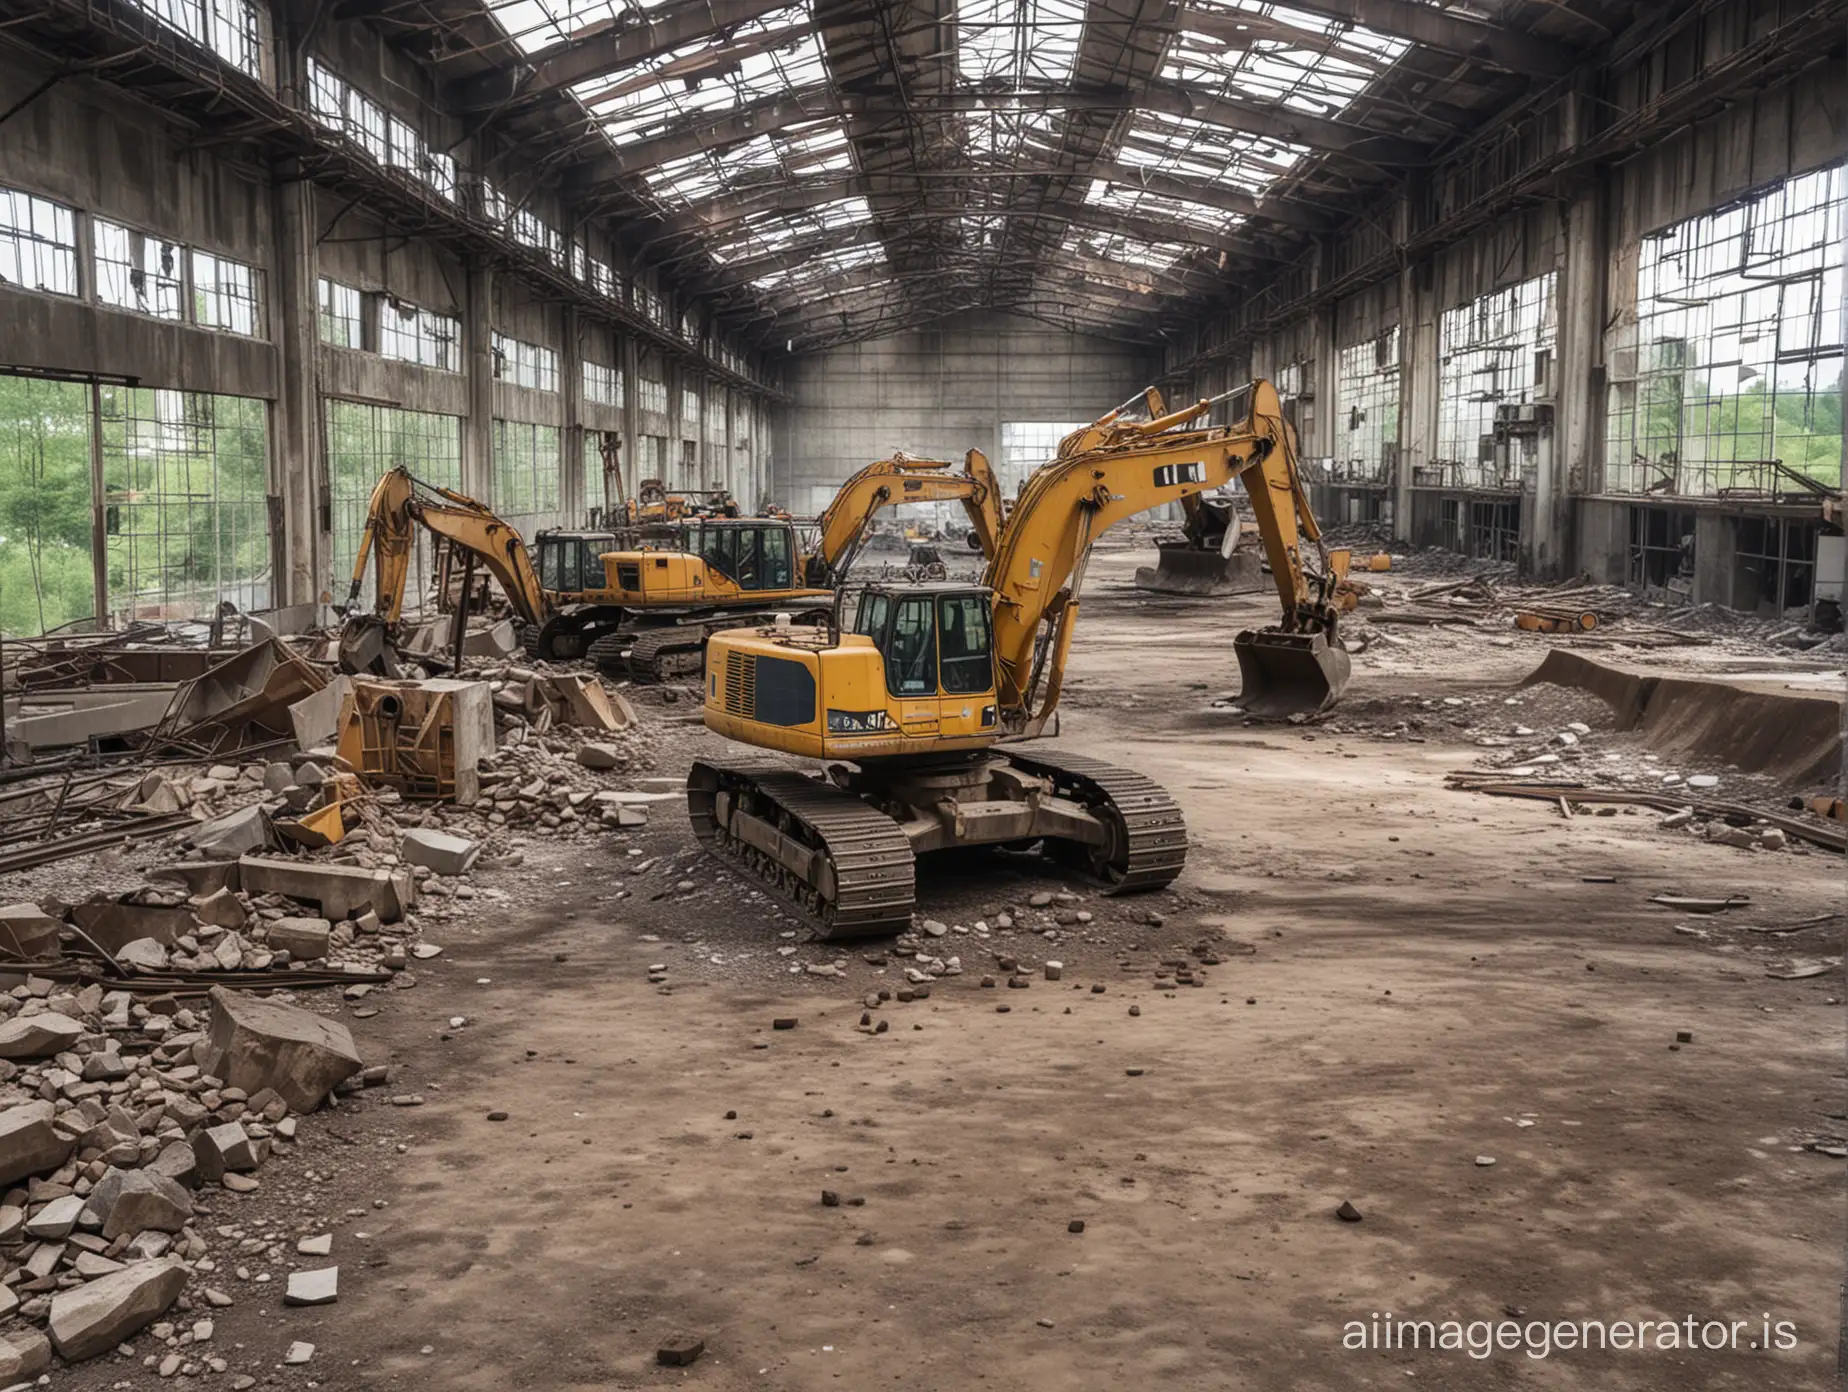 Abandoned factory for the production of giant quarry walking excavators